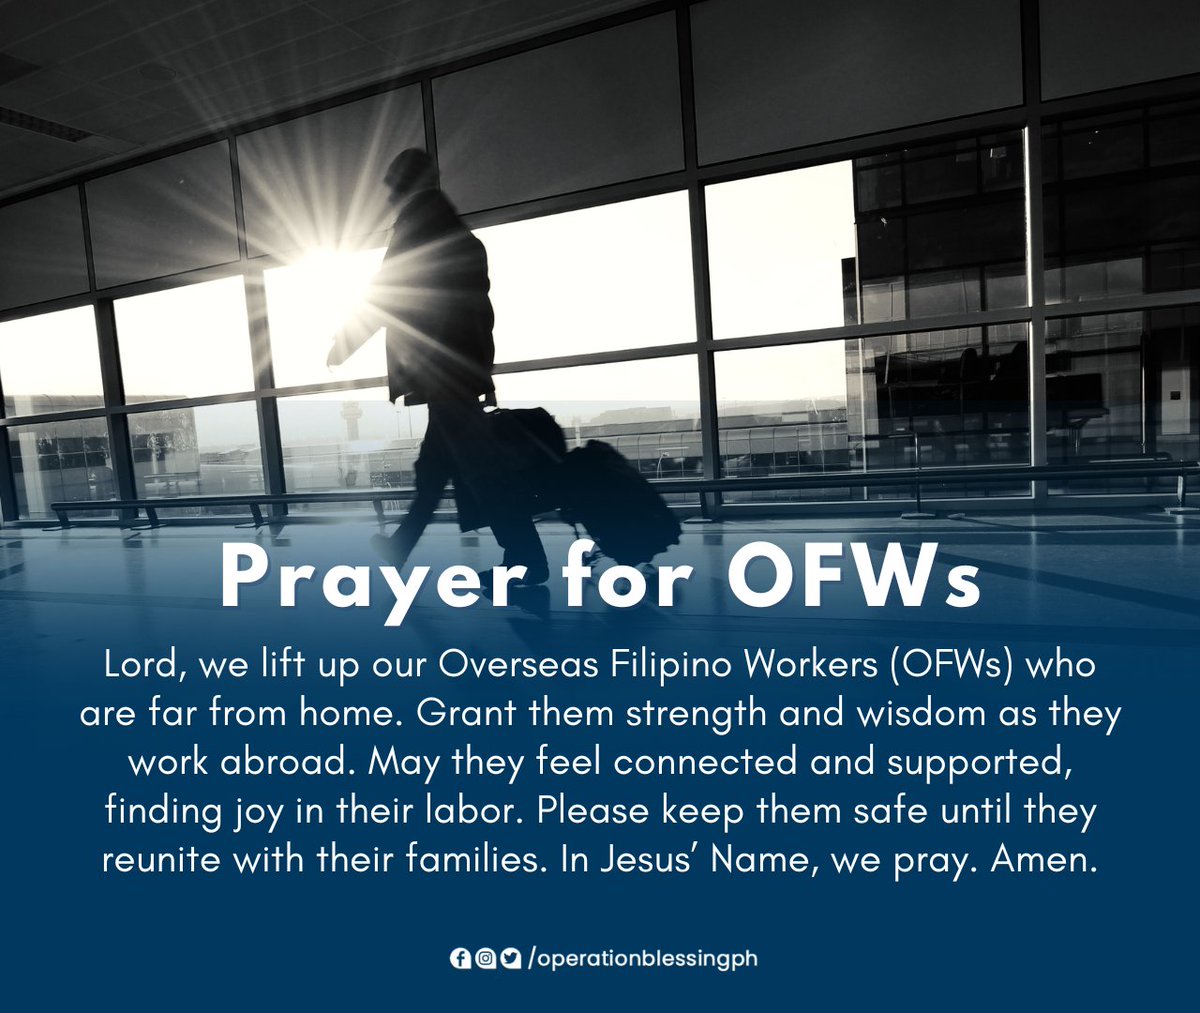 On this #LaborDay, let’s pause to offer a prayer for our Overseas Filipino Workers (OFWs) who labor abroad. Let's pray for their safety, strength, and well-being as they work hard to support their families and contribute to our nation's growth.

#PrayForOFWs #OperationBlessing